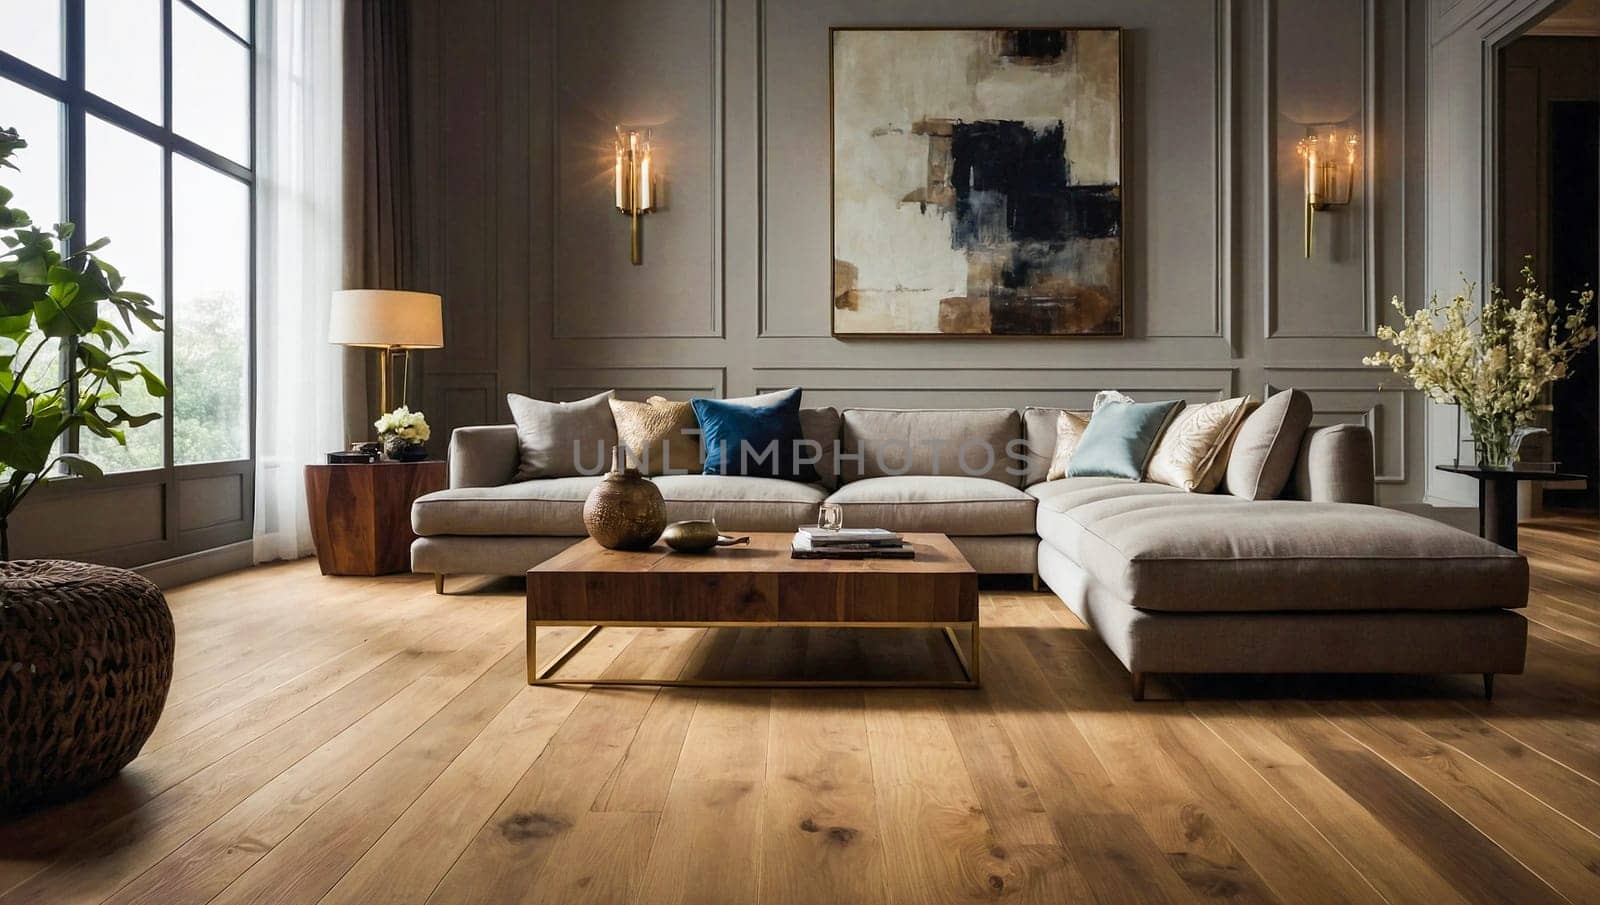 Modern interior of open space with design modular sofa, furniture, wooden coffee tables, pillows, plants and elegant personal accessories in stylish home decor, living room